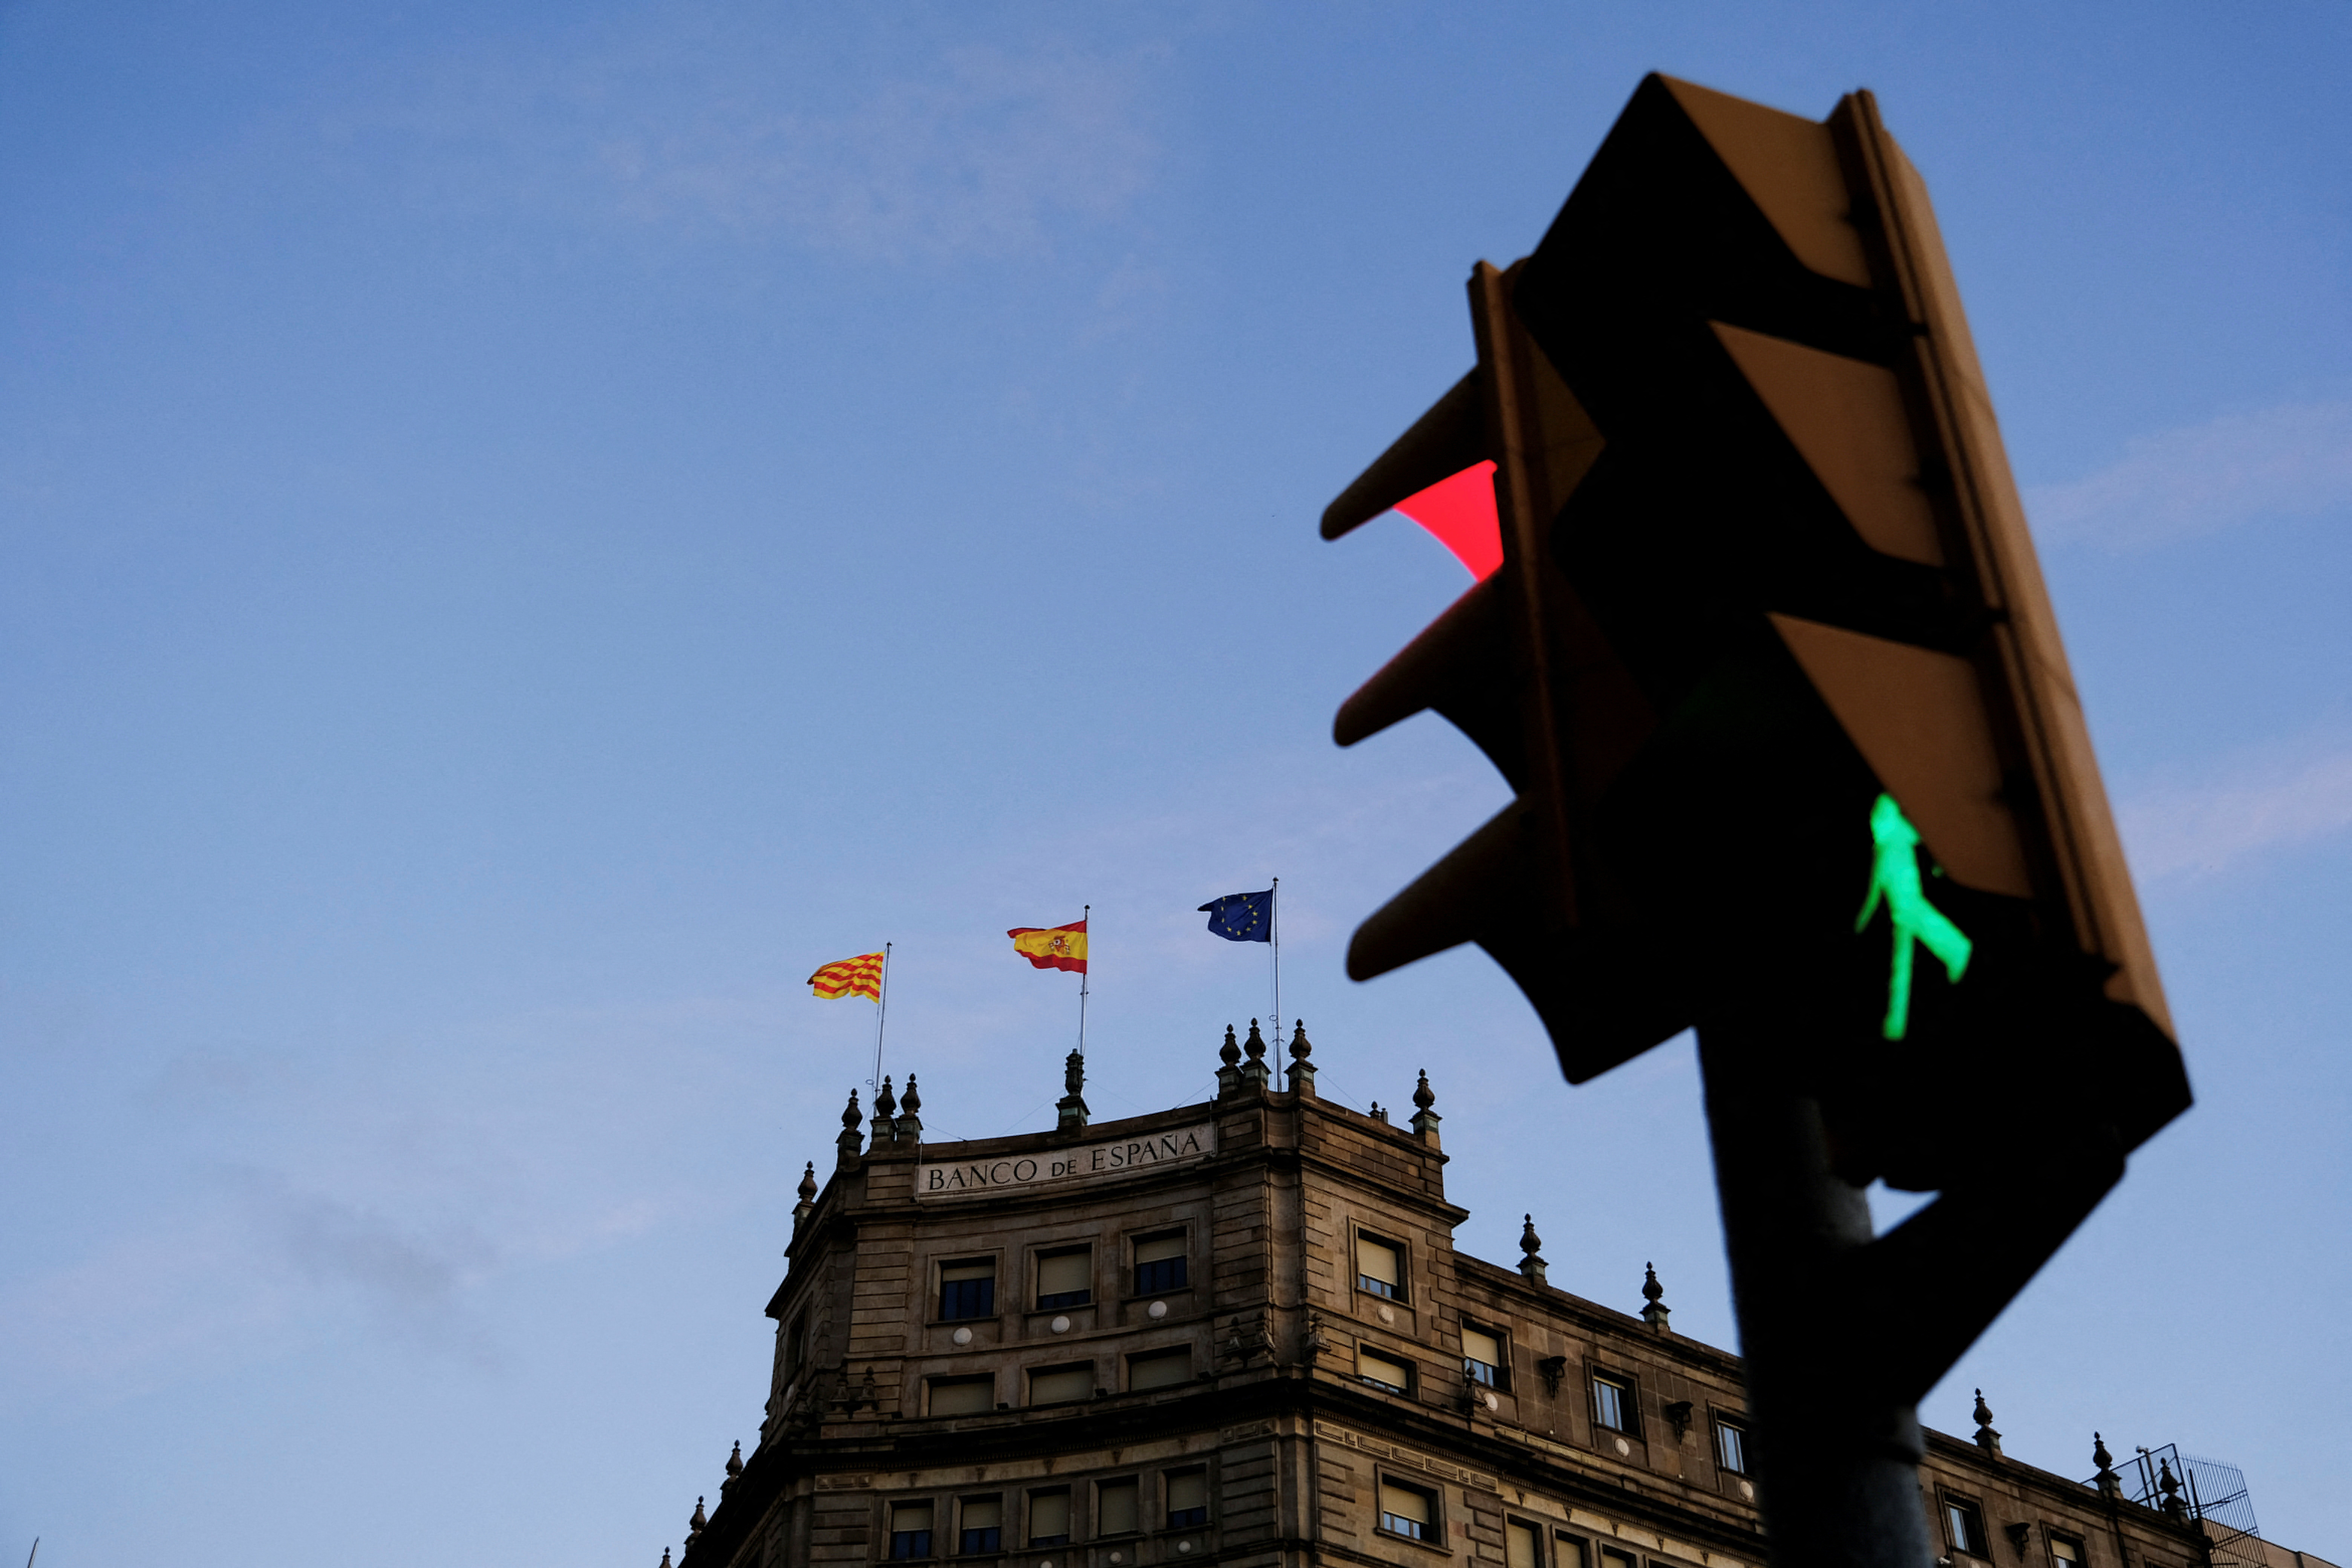 The Banco de Espana (Bank of Spain) office is seen in front of a traffic light in Barcelona